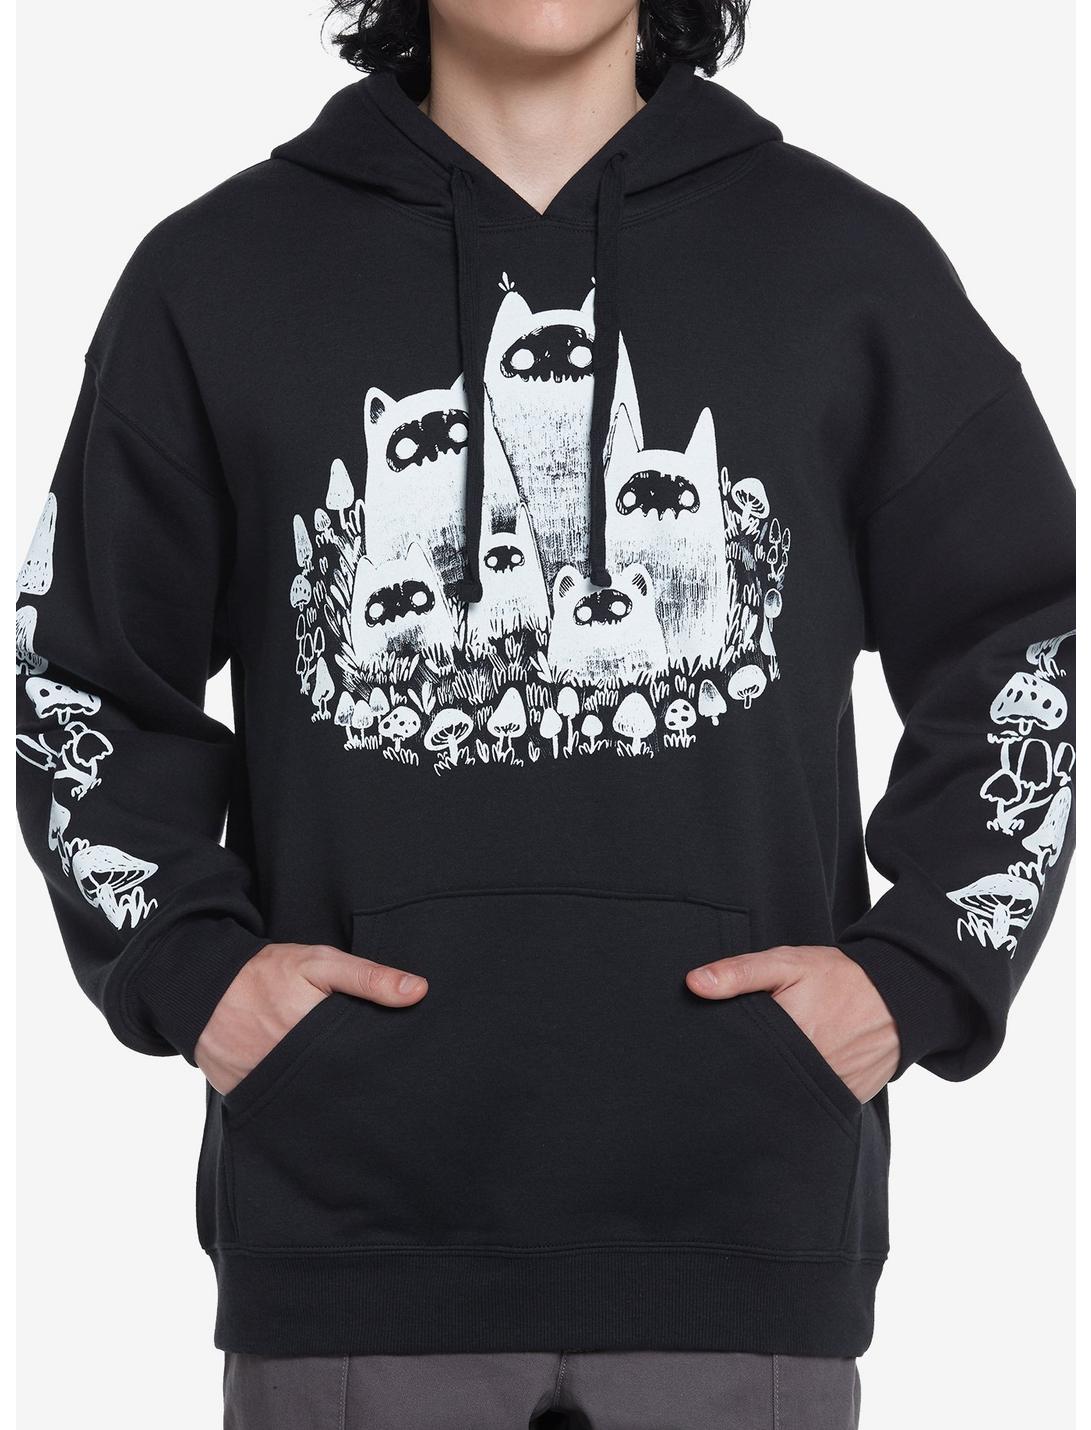 Forest Creatures & Mushrooms Hoodie By Guild Of Calamity, BLACK, hi-res